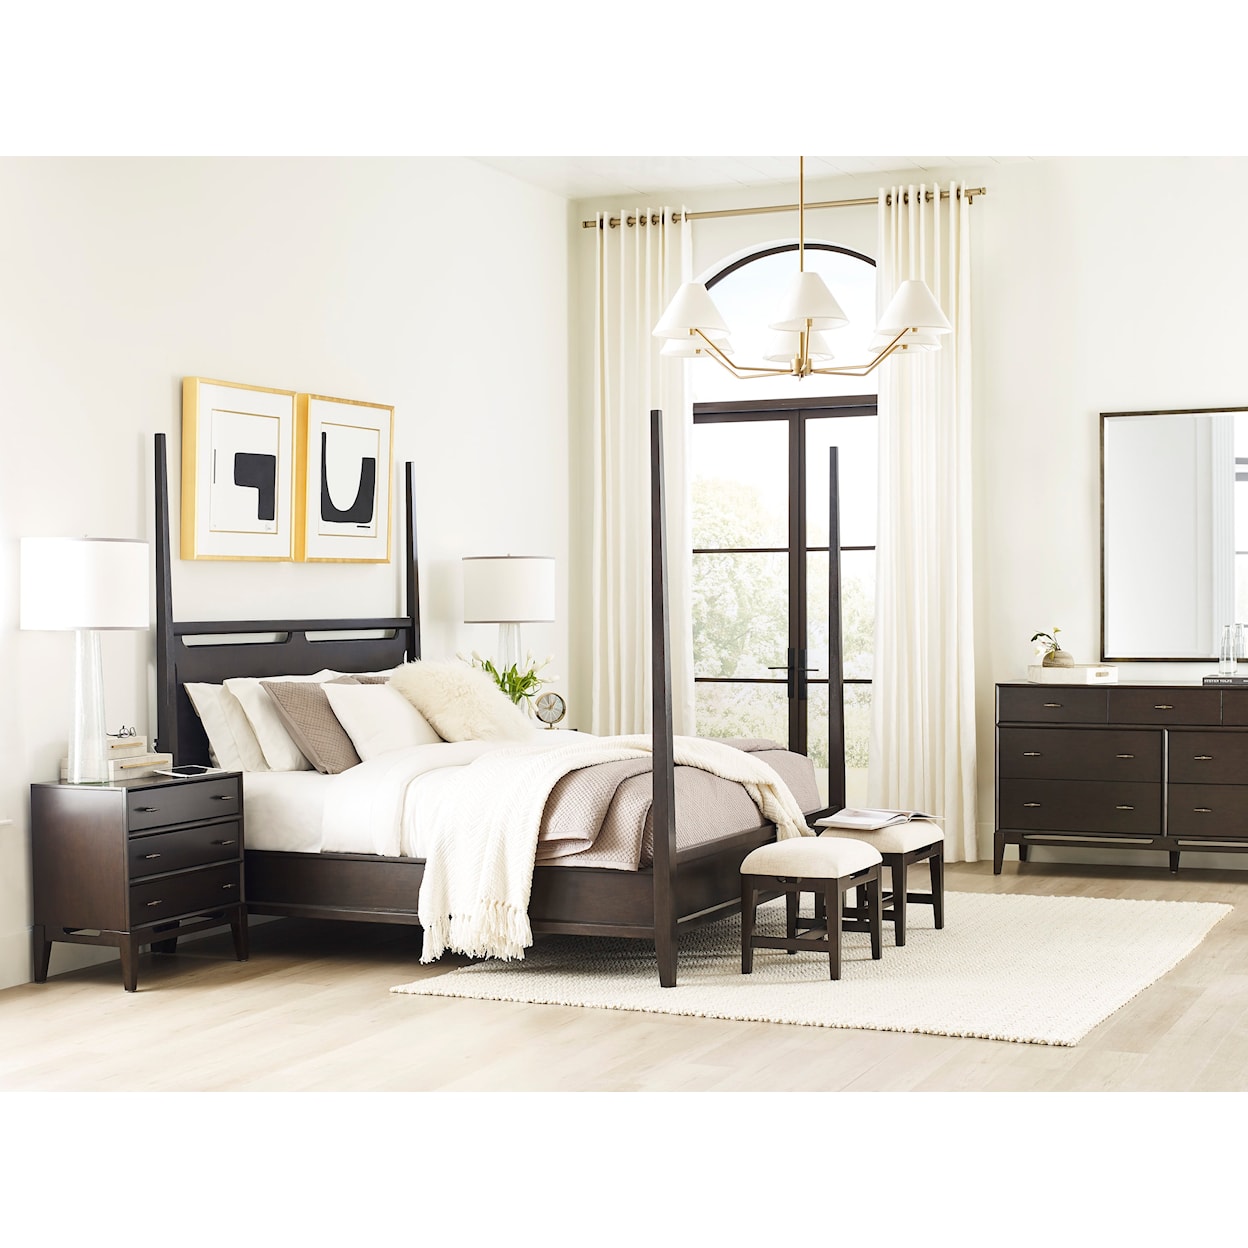 Aspenhome Sutton Cal. King Poster Bed